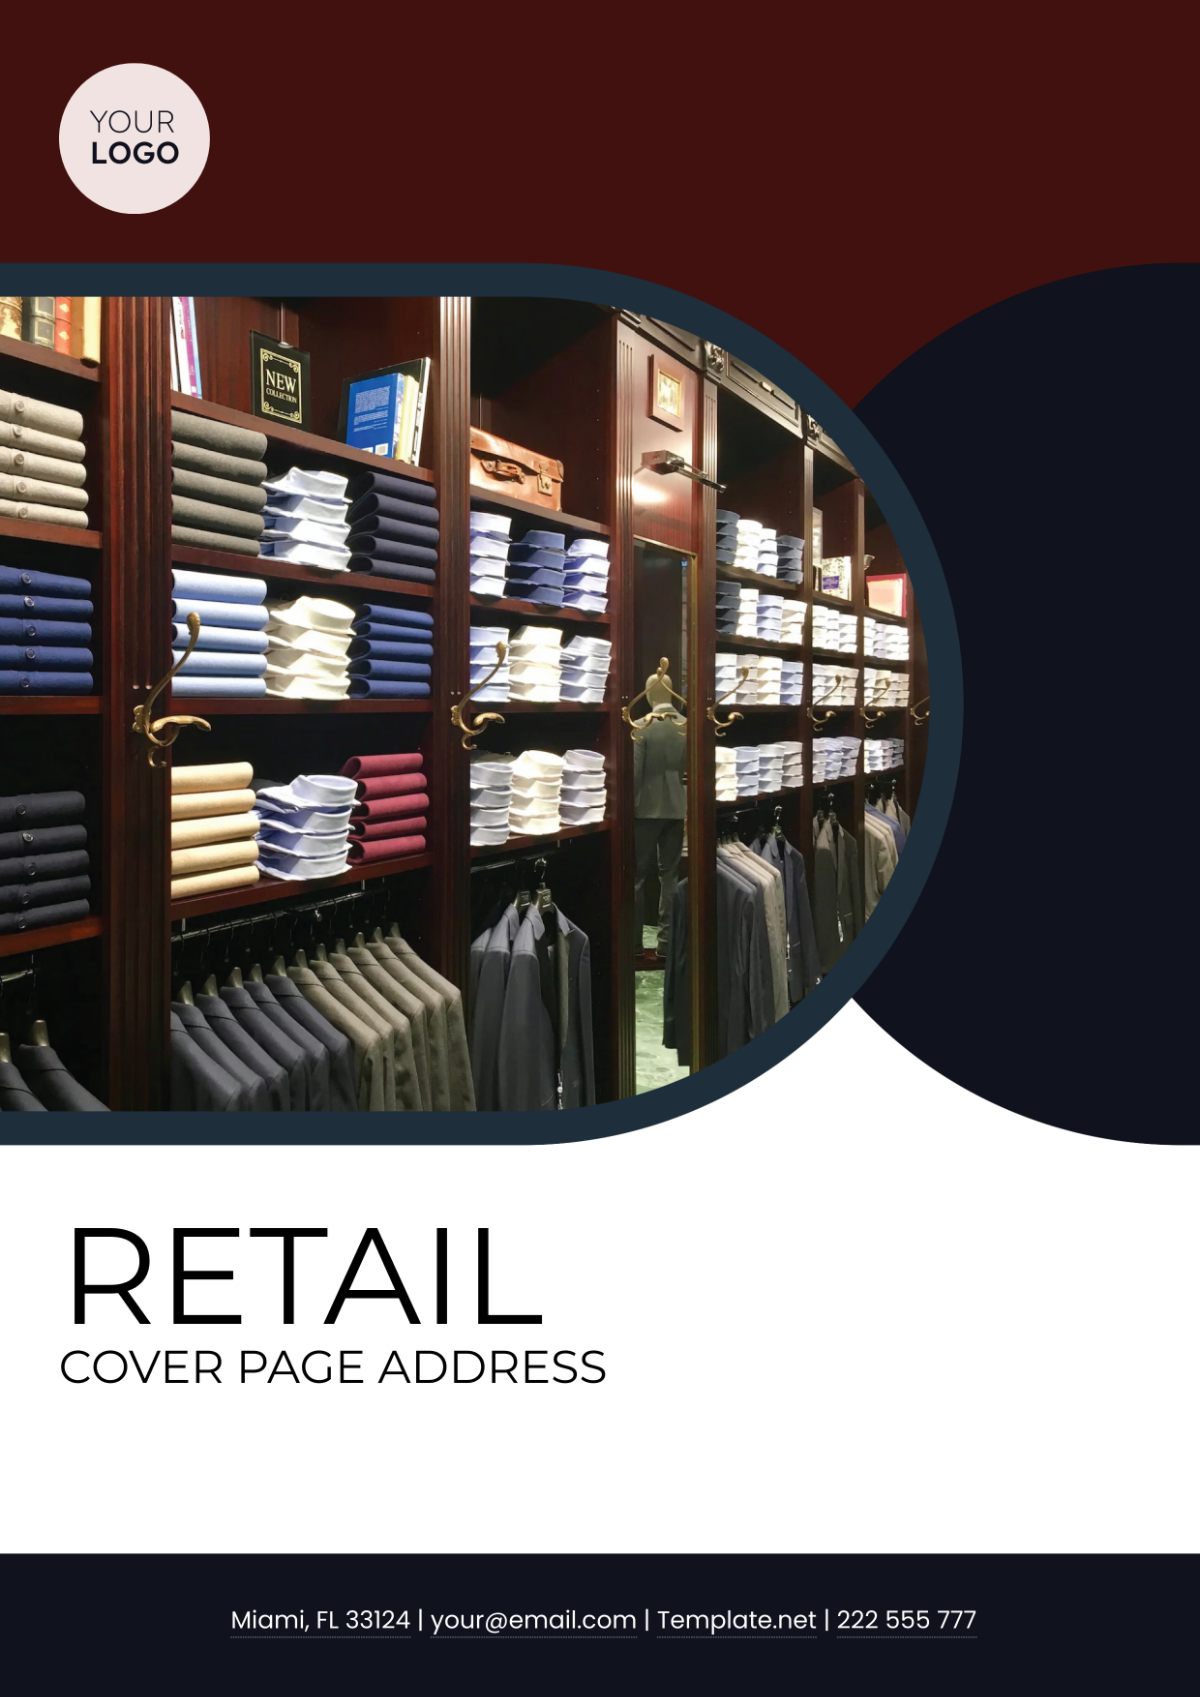 Retail Cover Page Address